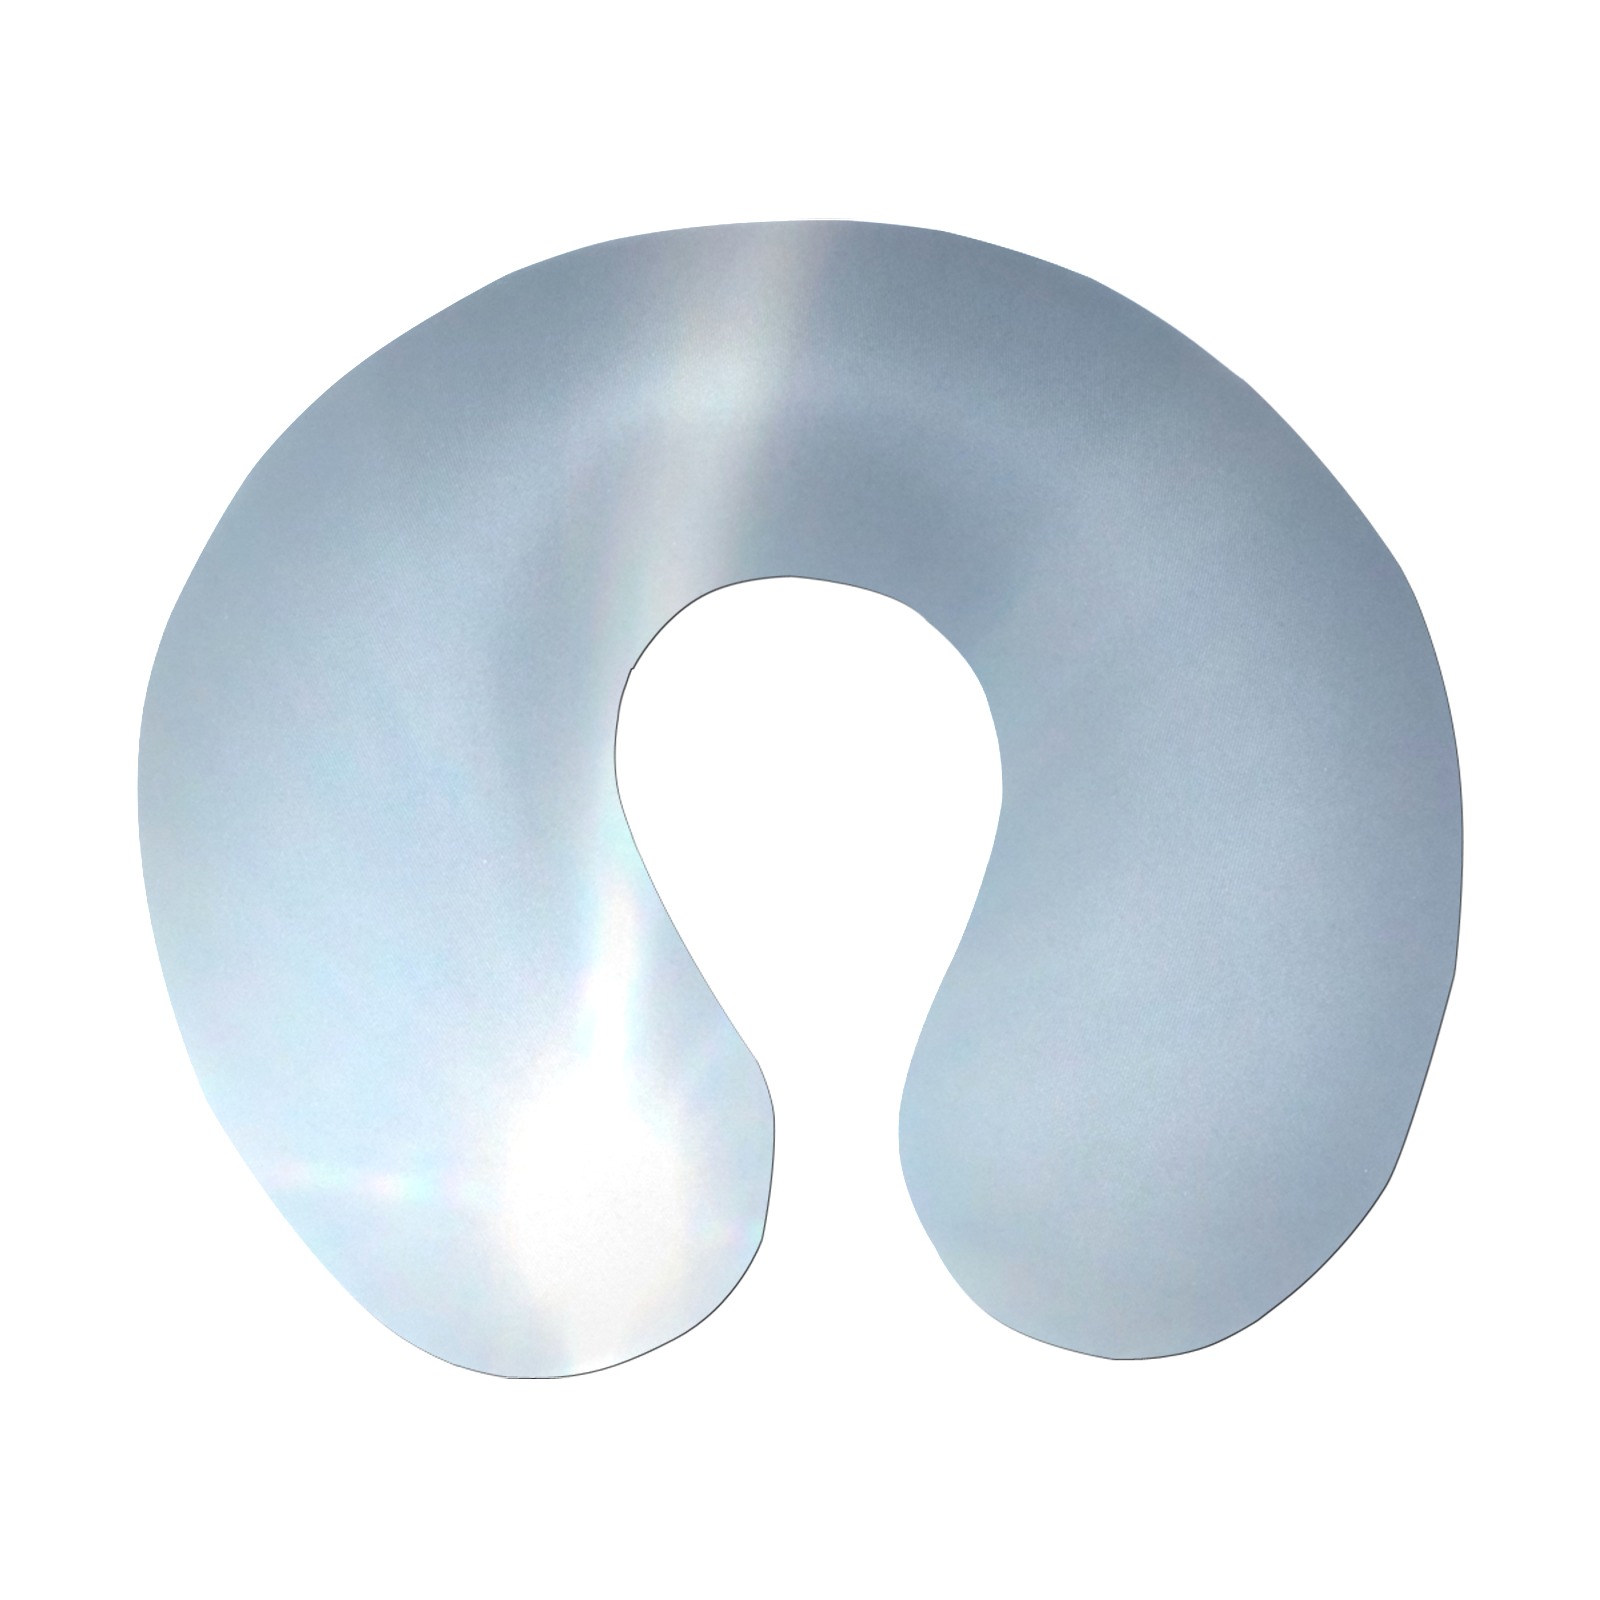 Light Cycle Collection U-Shape Travel Pillow